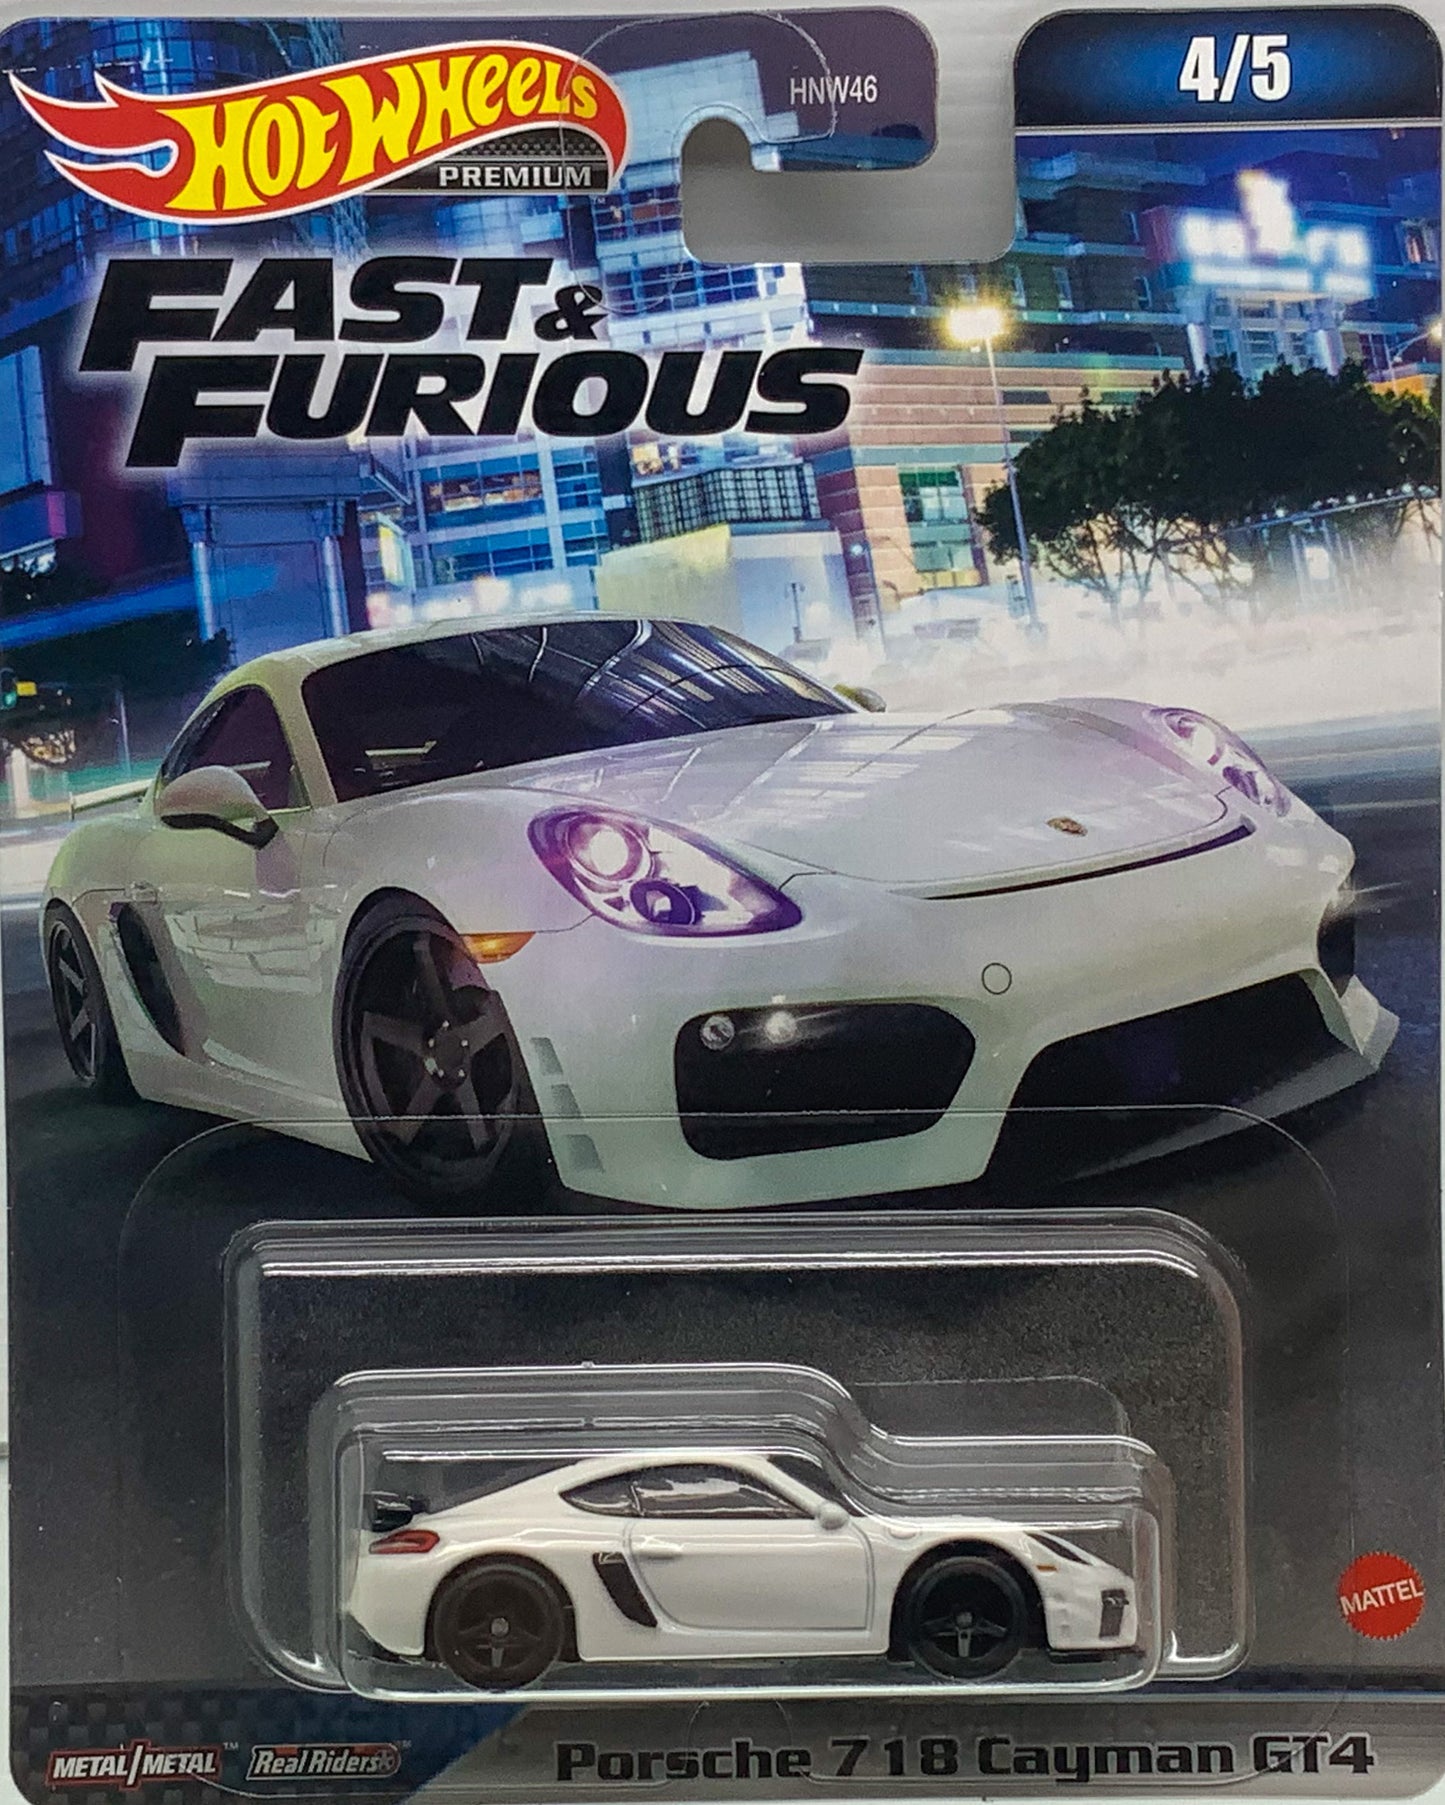 Buy at www.tatoyshop.com 2023 Hot Wheels Premium Fast & Furious Series  2023 Hot Wheels Premium Fast & Furious Porsche 718 Cayman GT4 4/5  Number 4 from the set of 5 Fast & Furious Series Premium Real Riders Metal Mattel HNW46 Shop Now   Mr Toys Kmart Target Big W  International and Domestic delivery by Australia Post